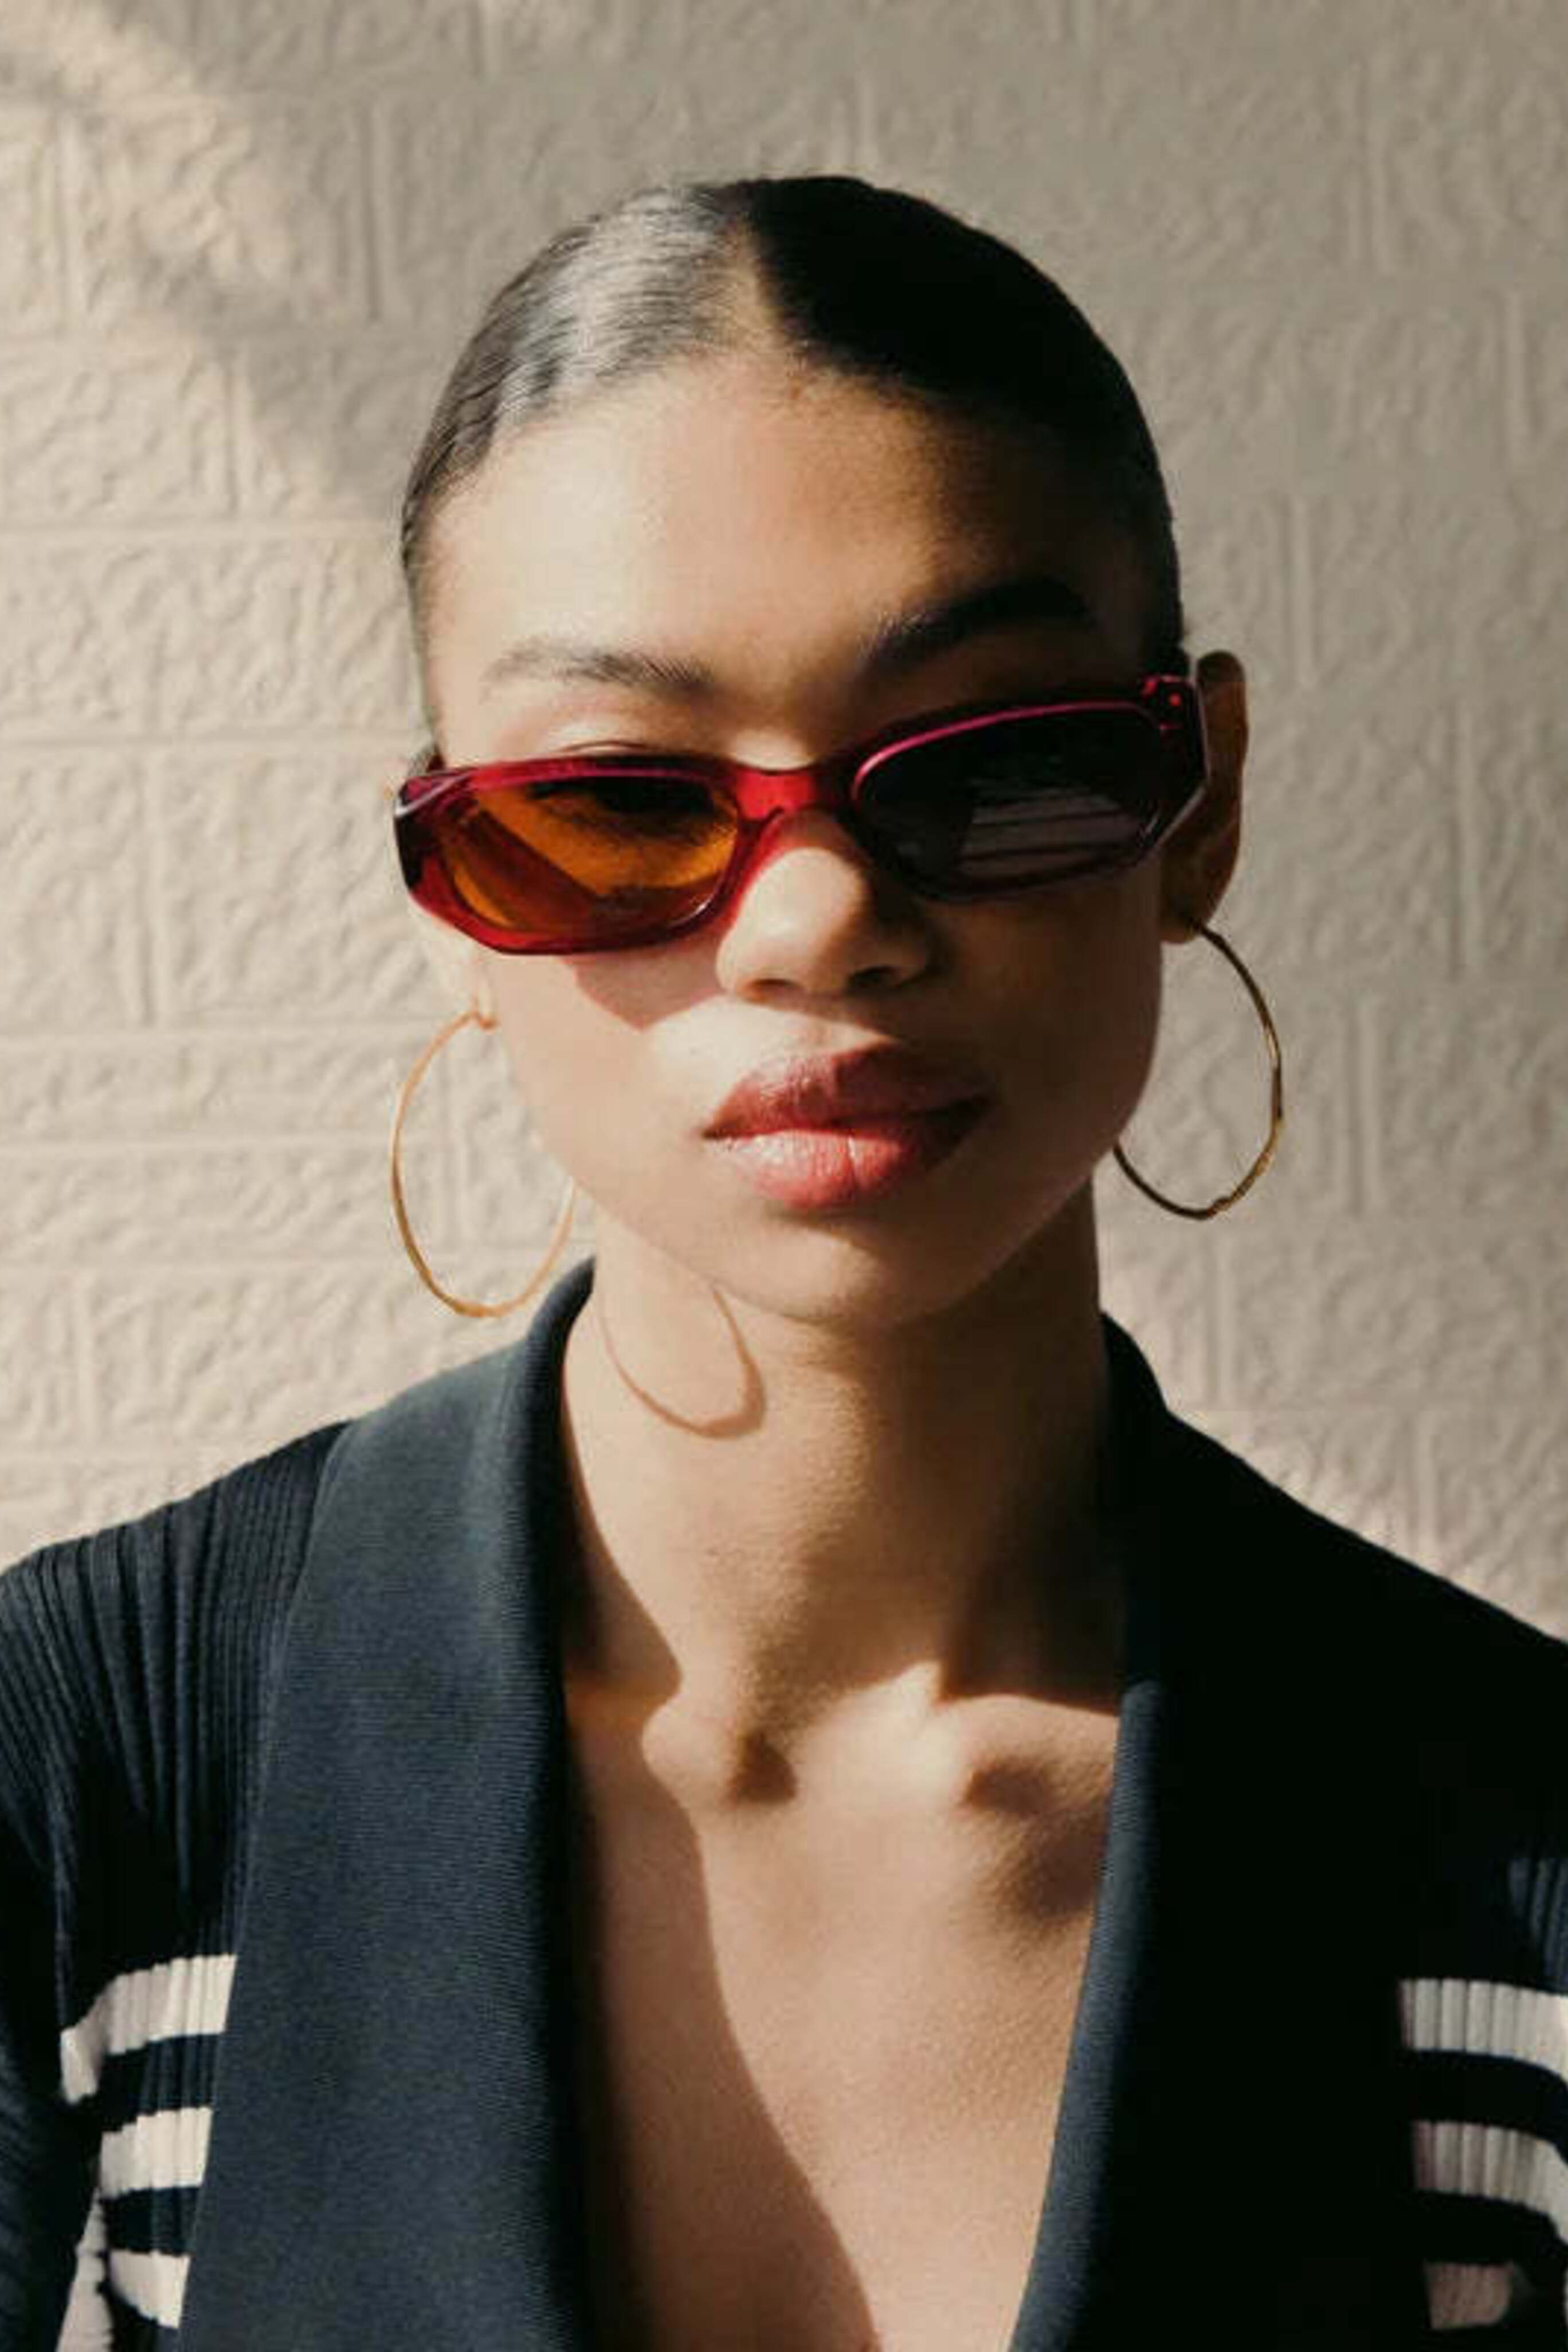 Oré Sunglasses in Pink